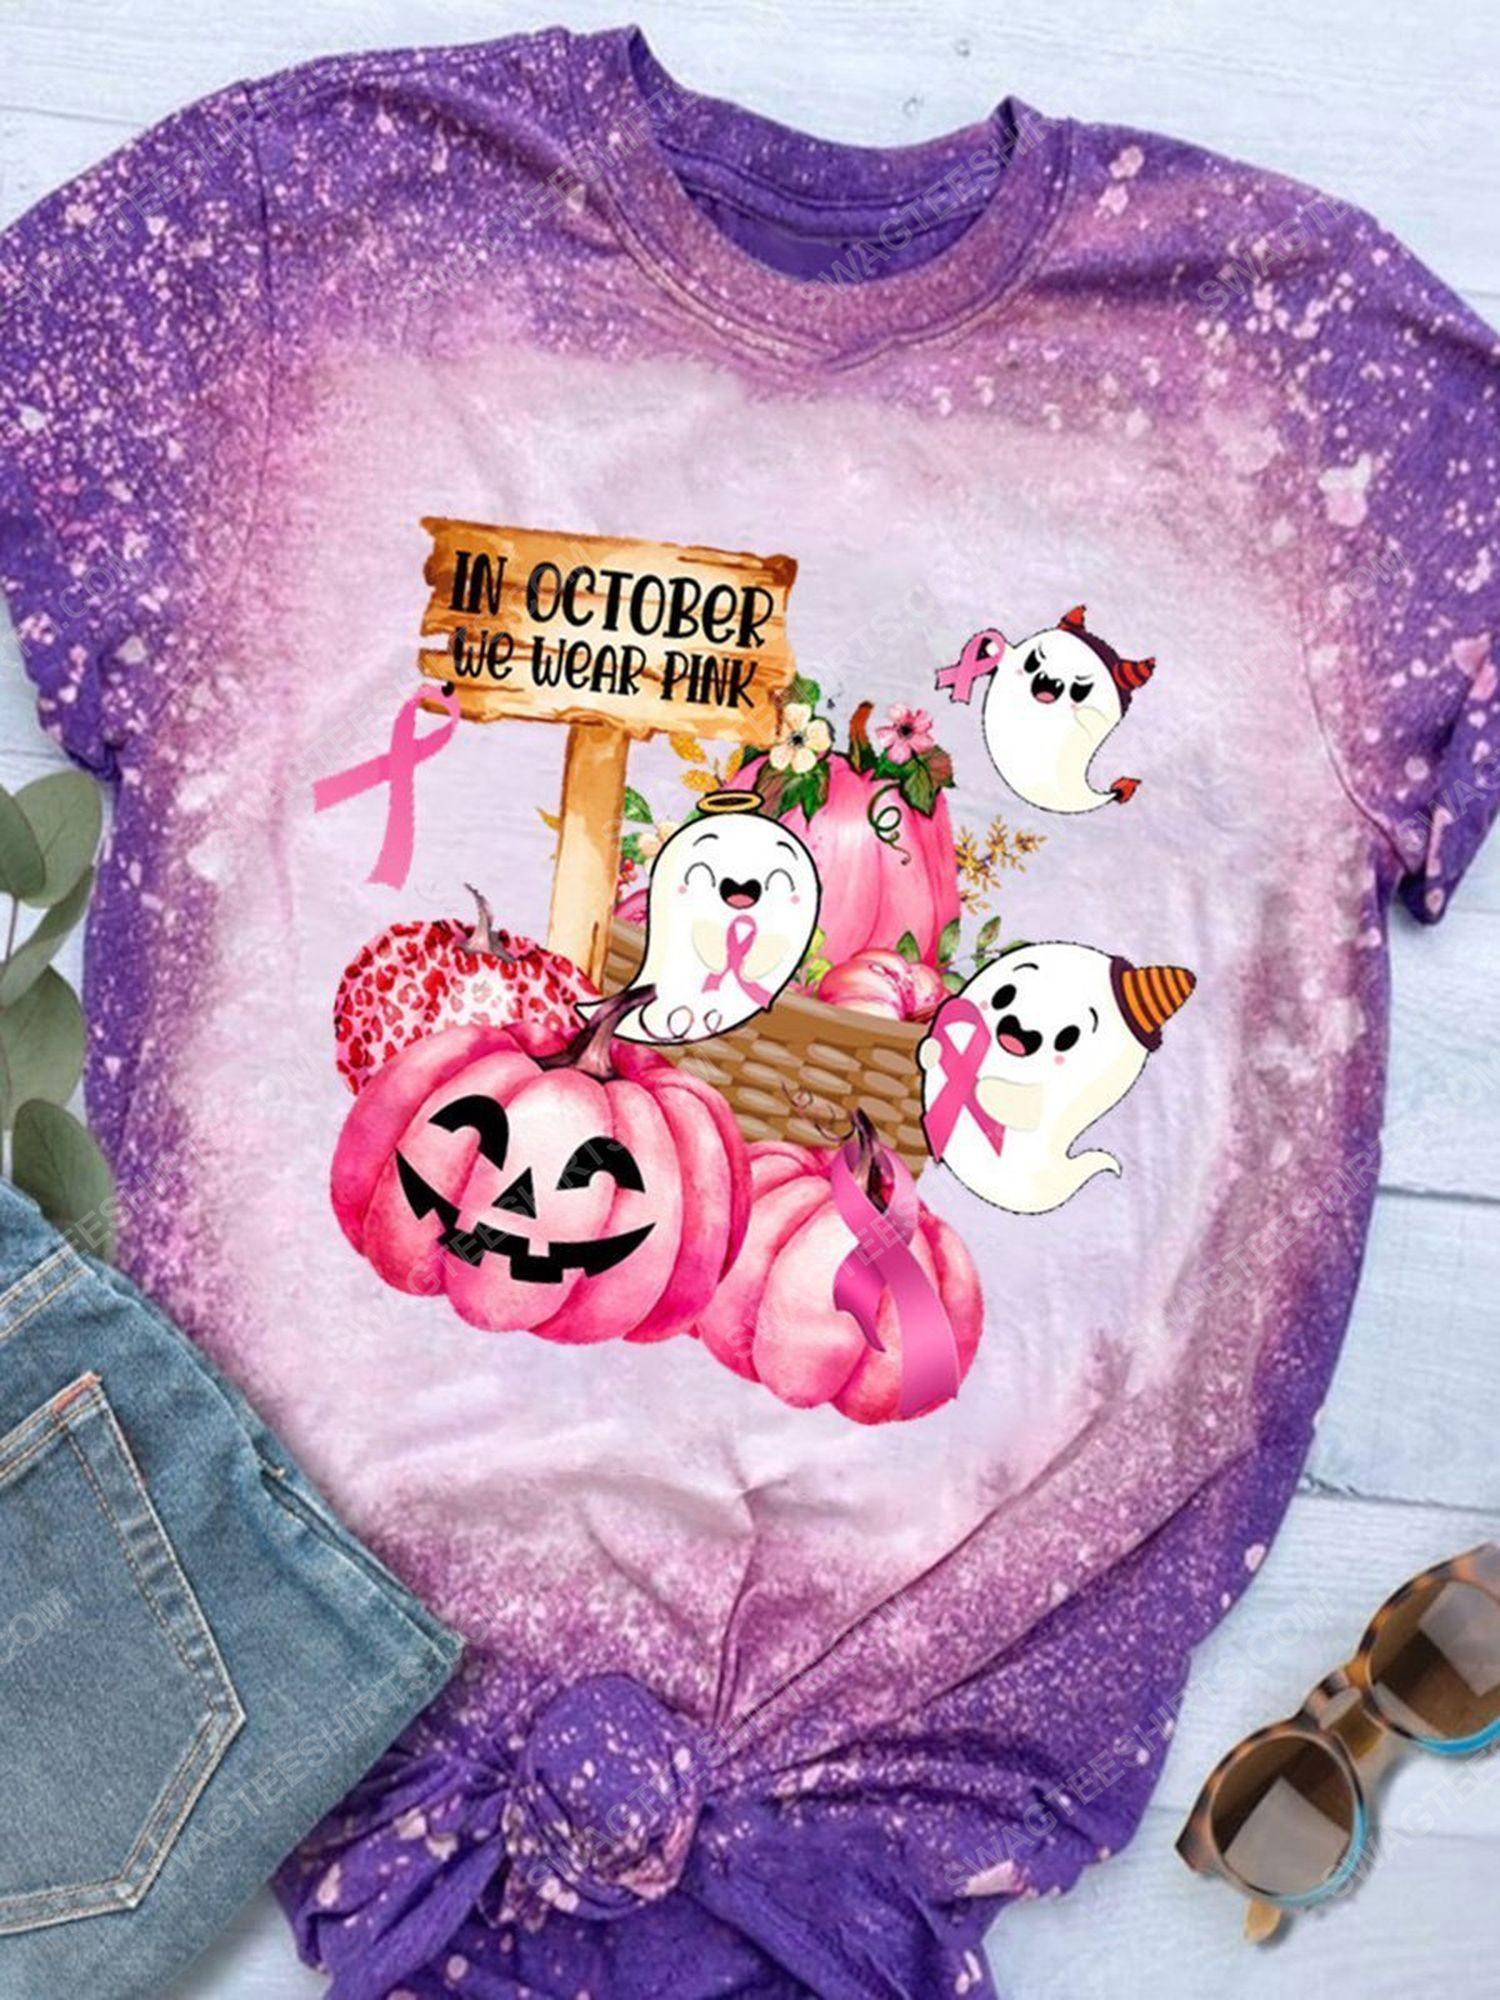 Breast cancer awareness in october we wear pink pumpkin ghost and ribbons ​bleached shirt